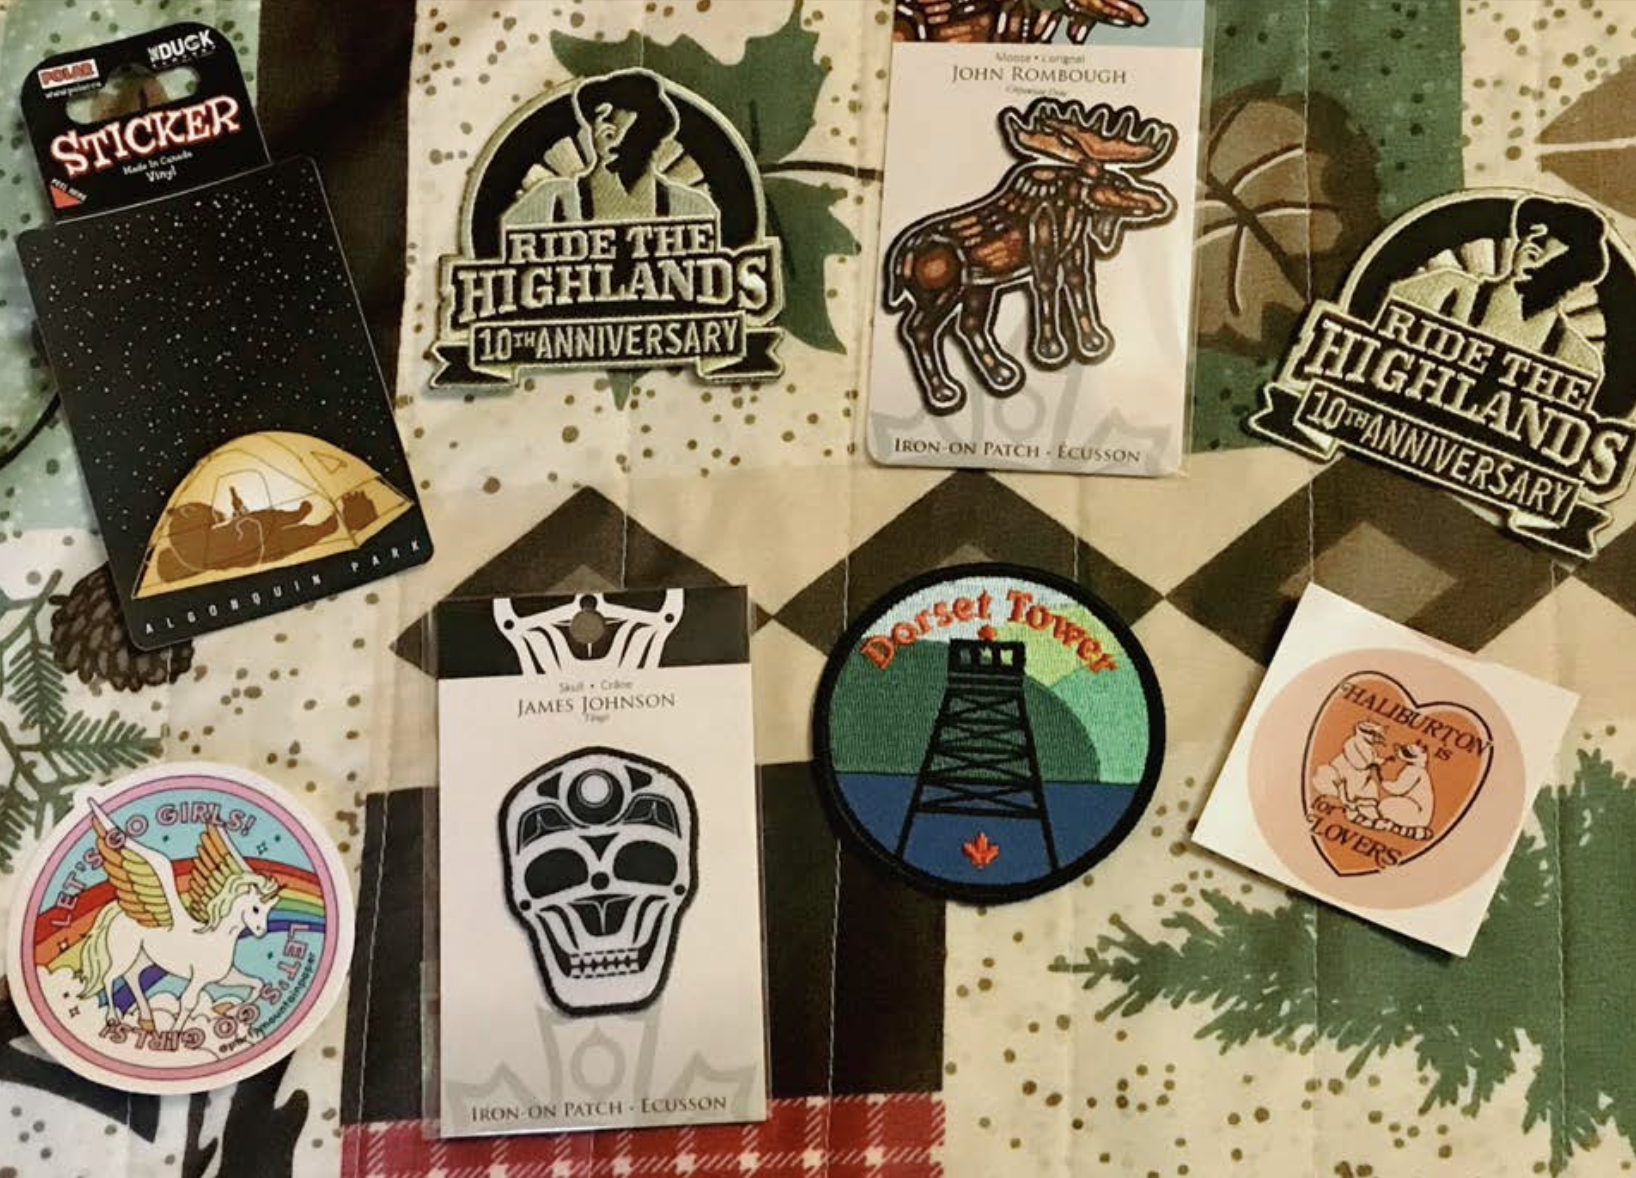 a collection of embroidered patches laid out on a bedspread printed with evergreen trees. Some of the patches advertise "Ride the Highlands", "Dorset Tower", and a rainbow pegasus patch the says "Let's go Girls".